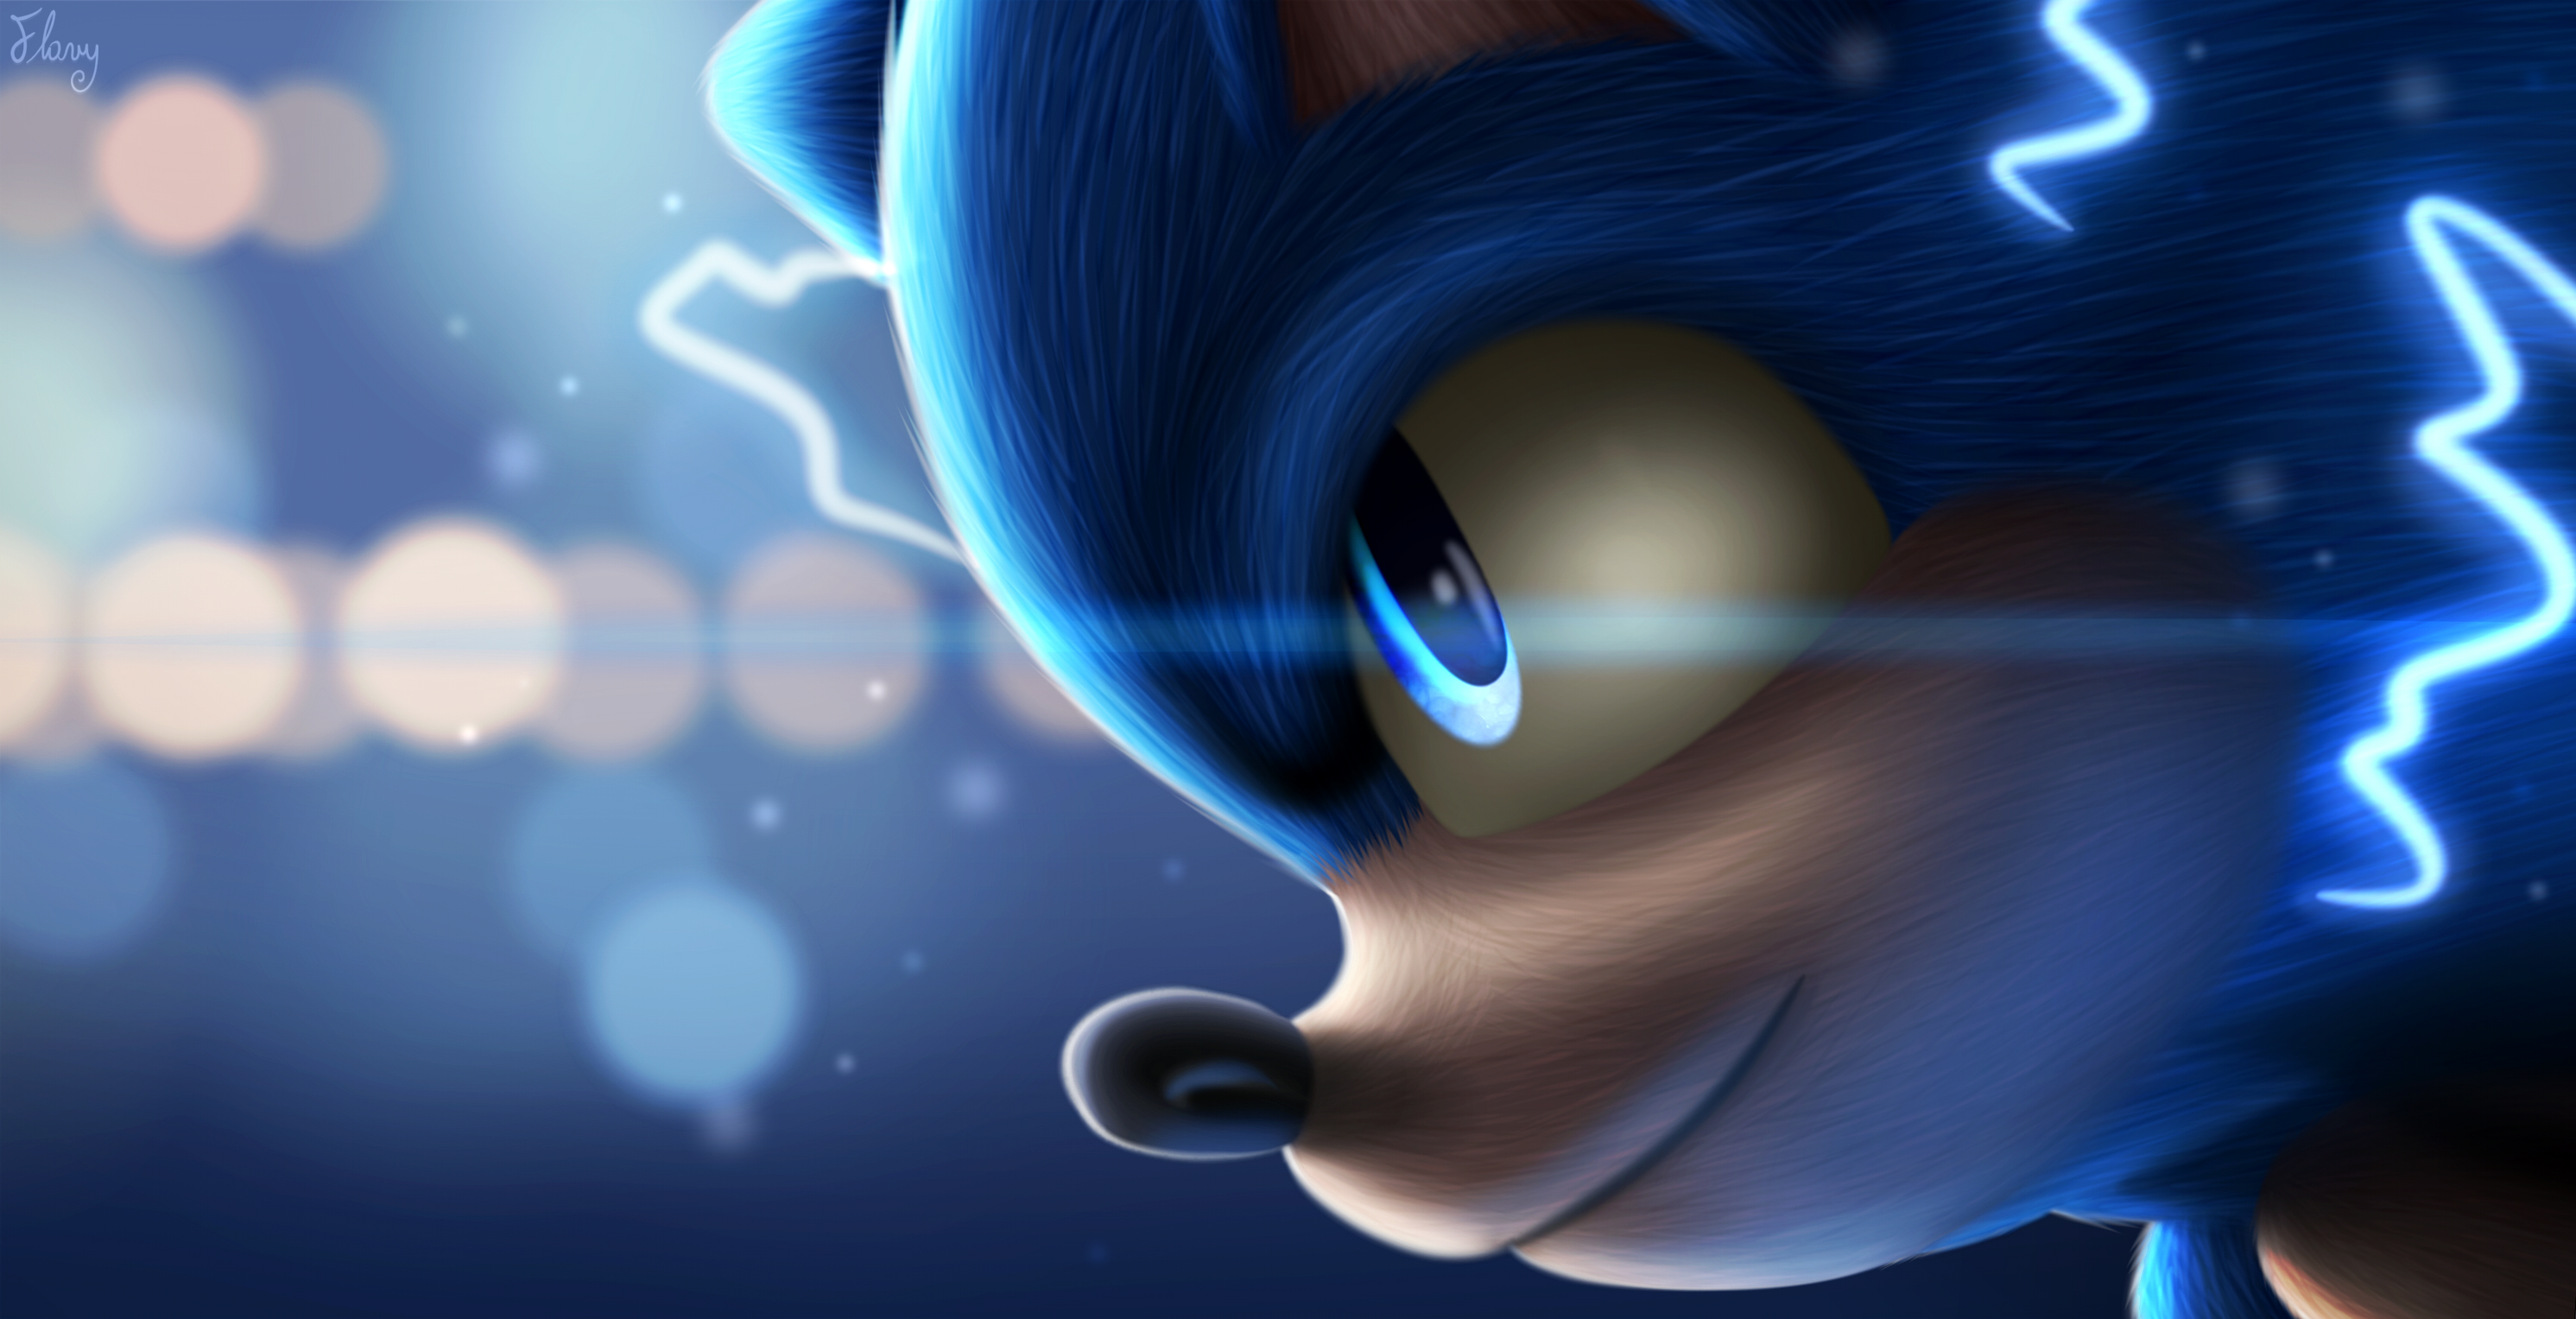 Movie Sonic the Hedgehog HD Wallpaper | Background Image